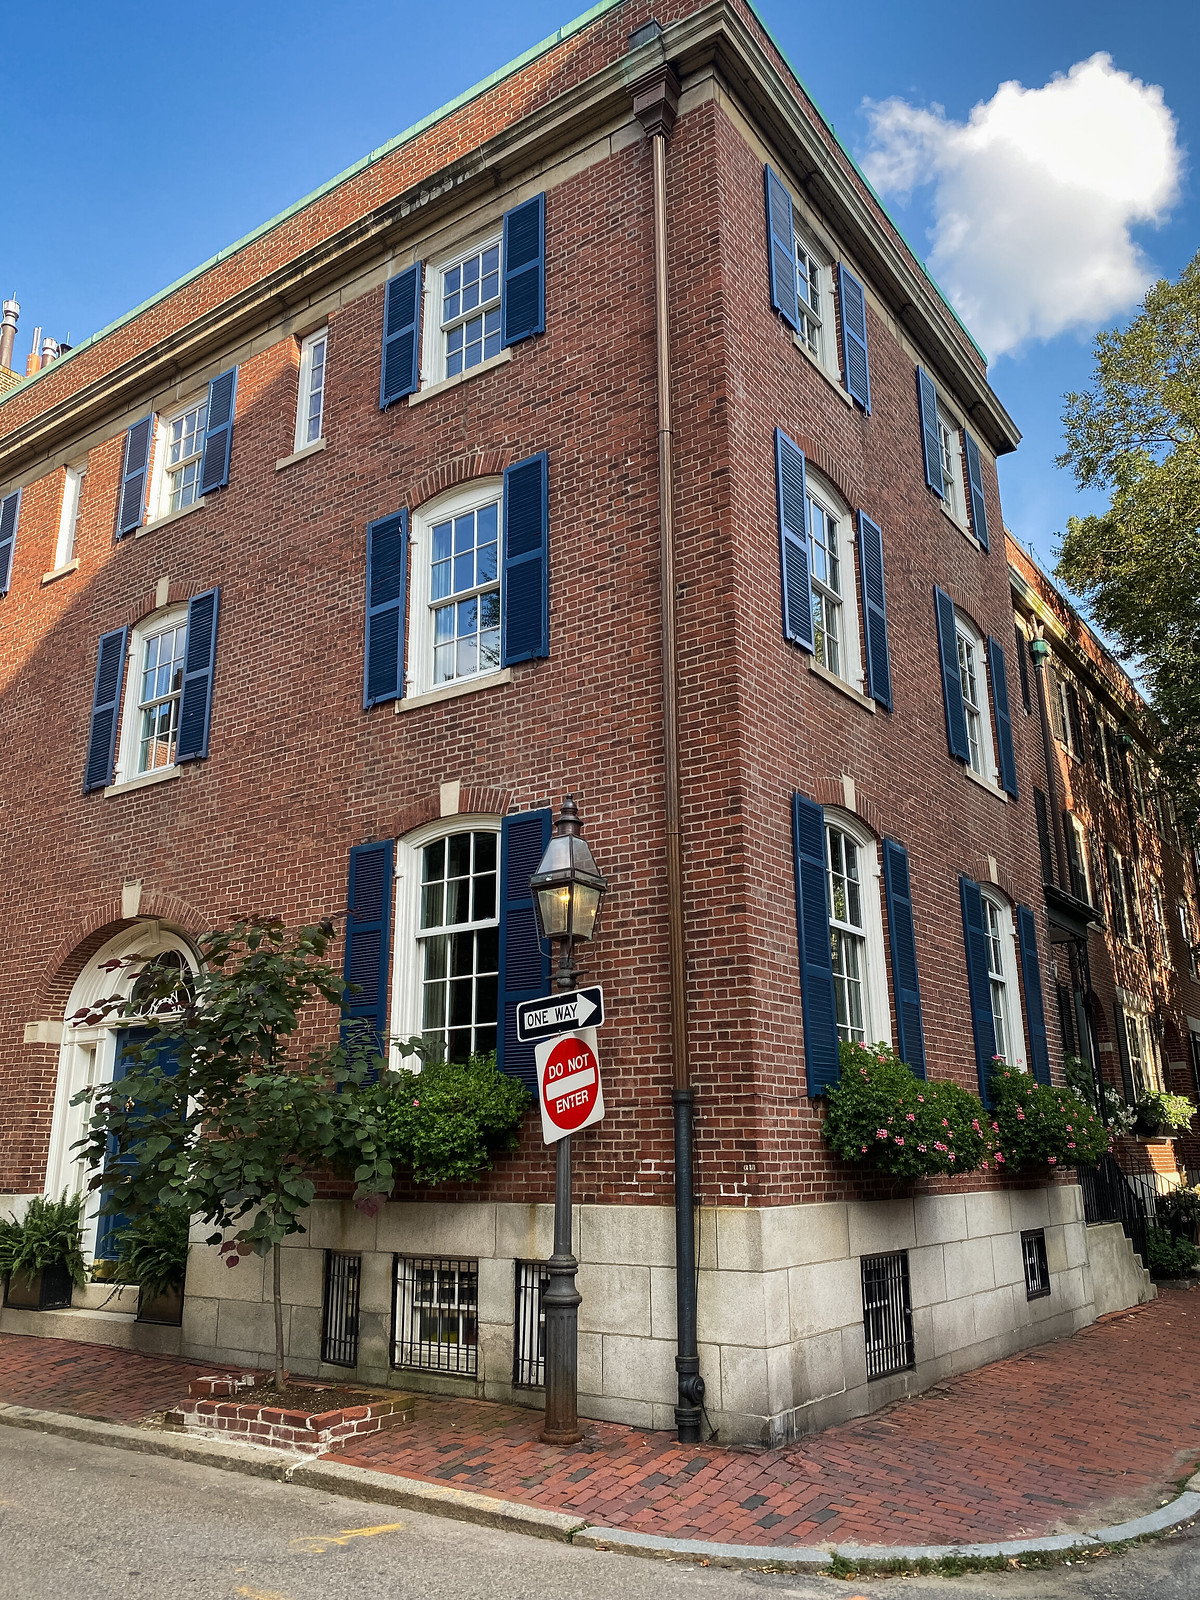 Beacon Hill Neighborhood in Boston, Massachusetts | New England Road Trip Itinerary - New England Road Trip - The Ultimate 7 Day Itinerary - The Perfect Summer New England Road Trip Itinerary